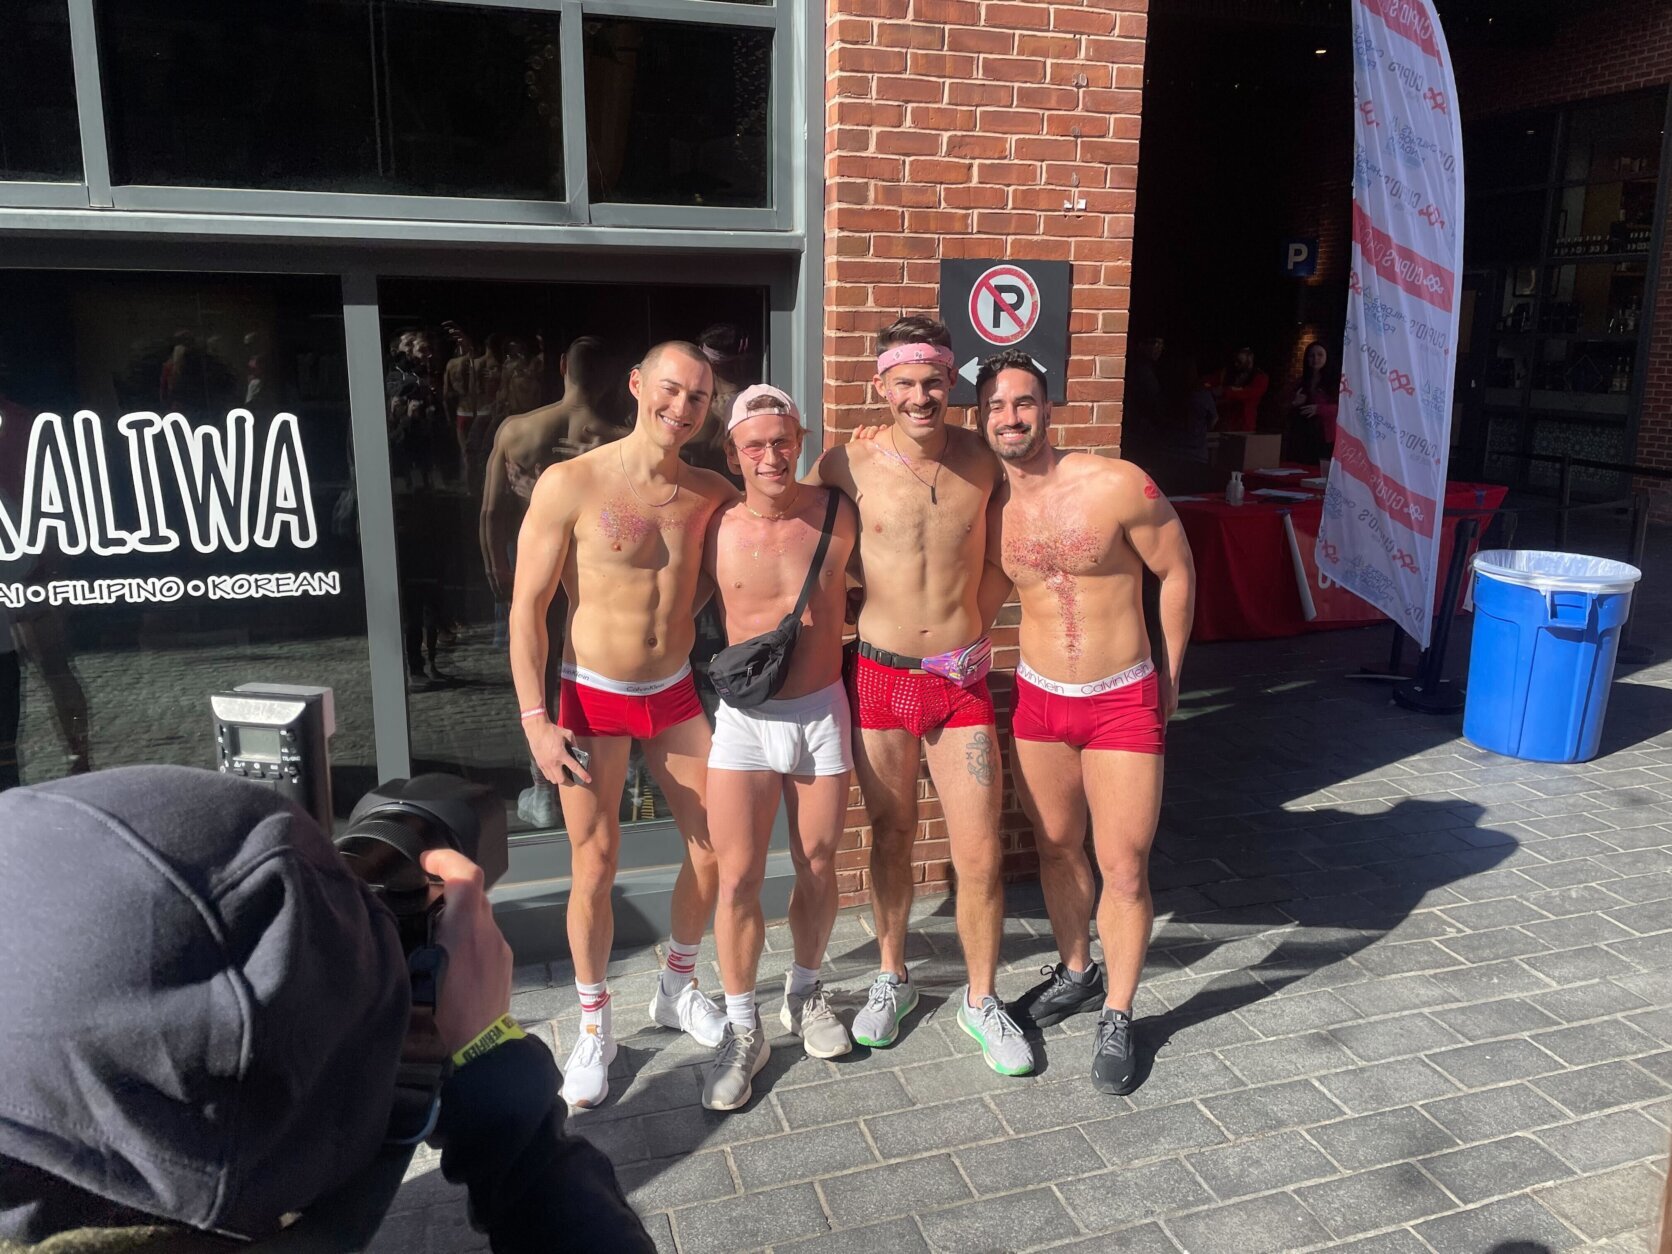 Annual DC undie run raises over $140K for genetic disorder research - WTOP  News